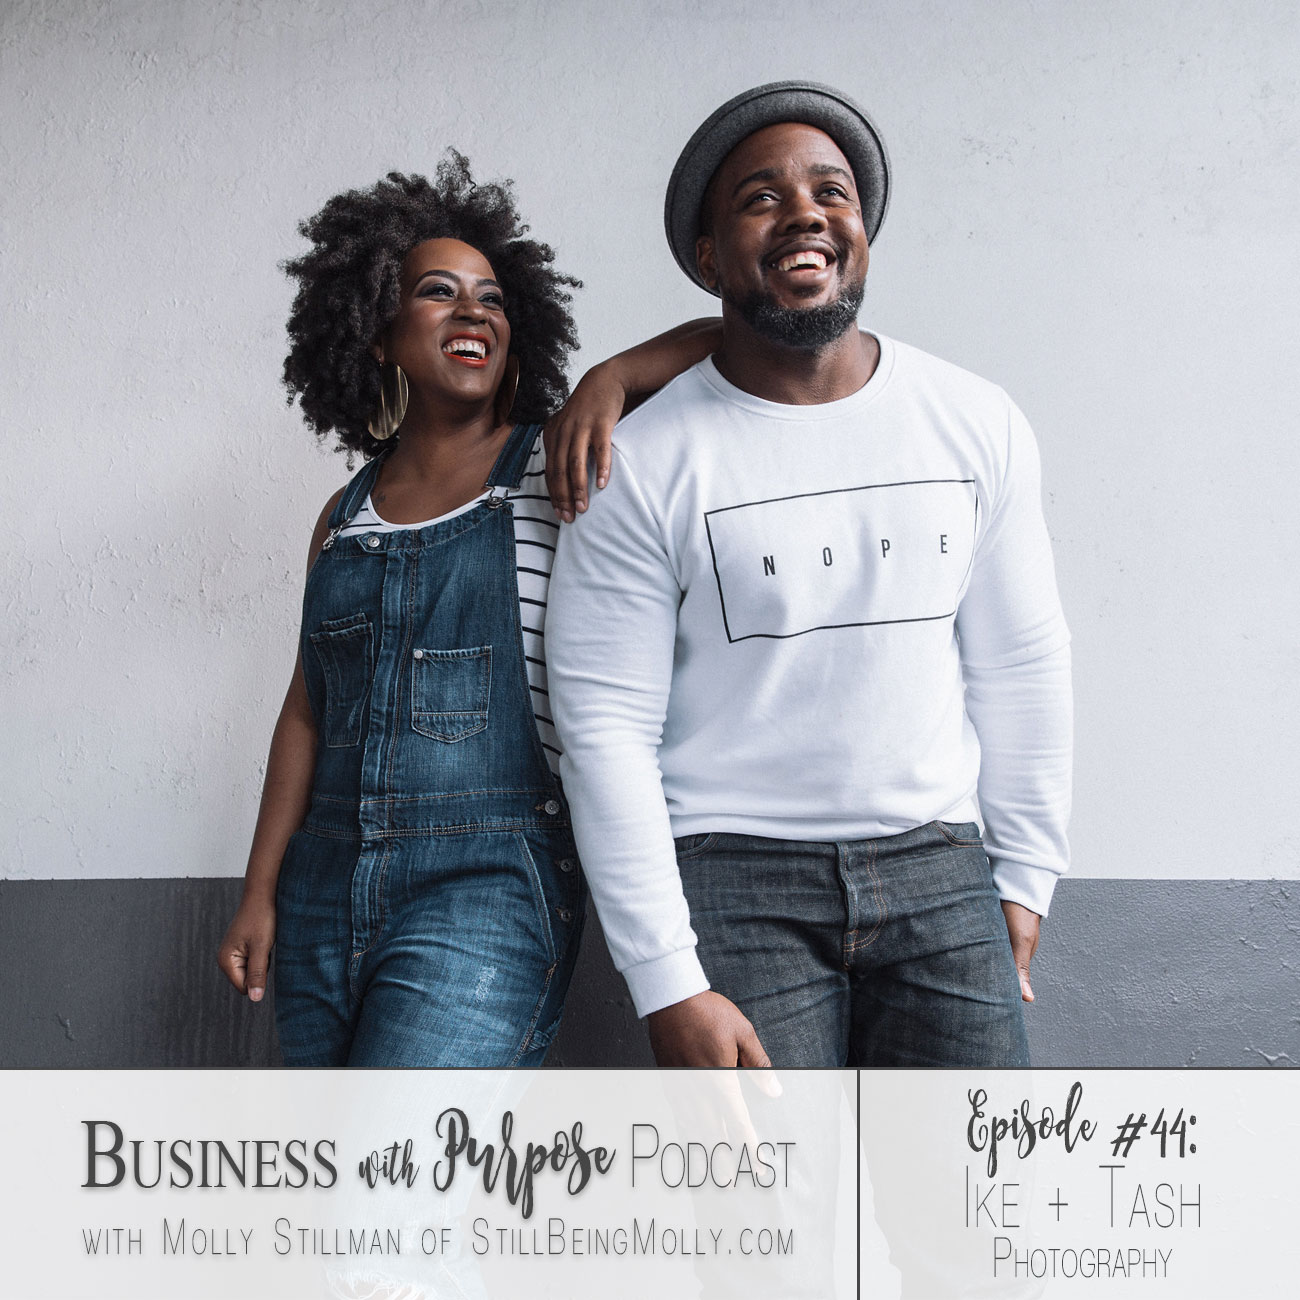 EP 44: Ike + Tash Photography - on running a business as a couple, seeing the bigger picture, and what makes them unique